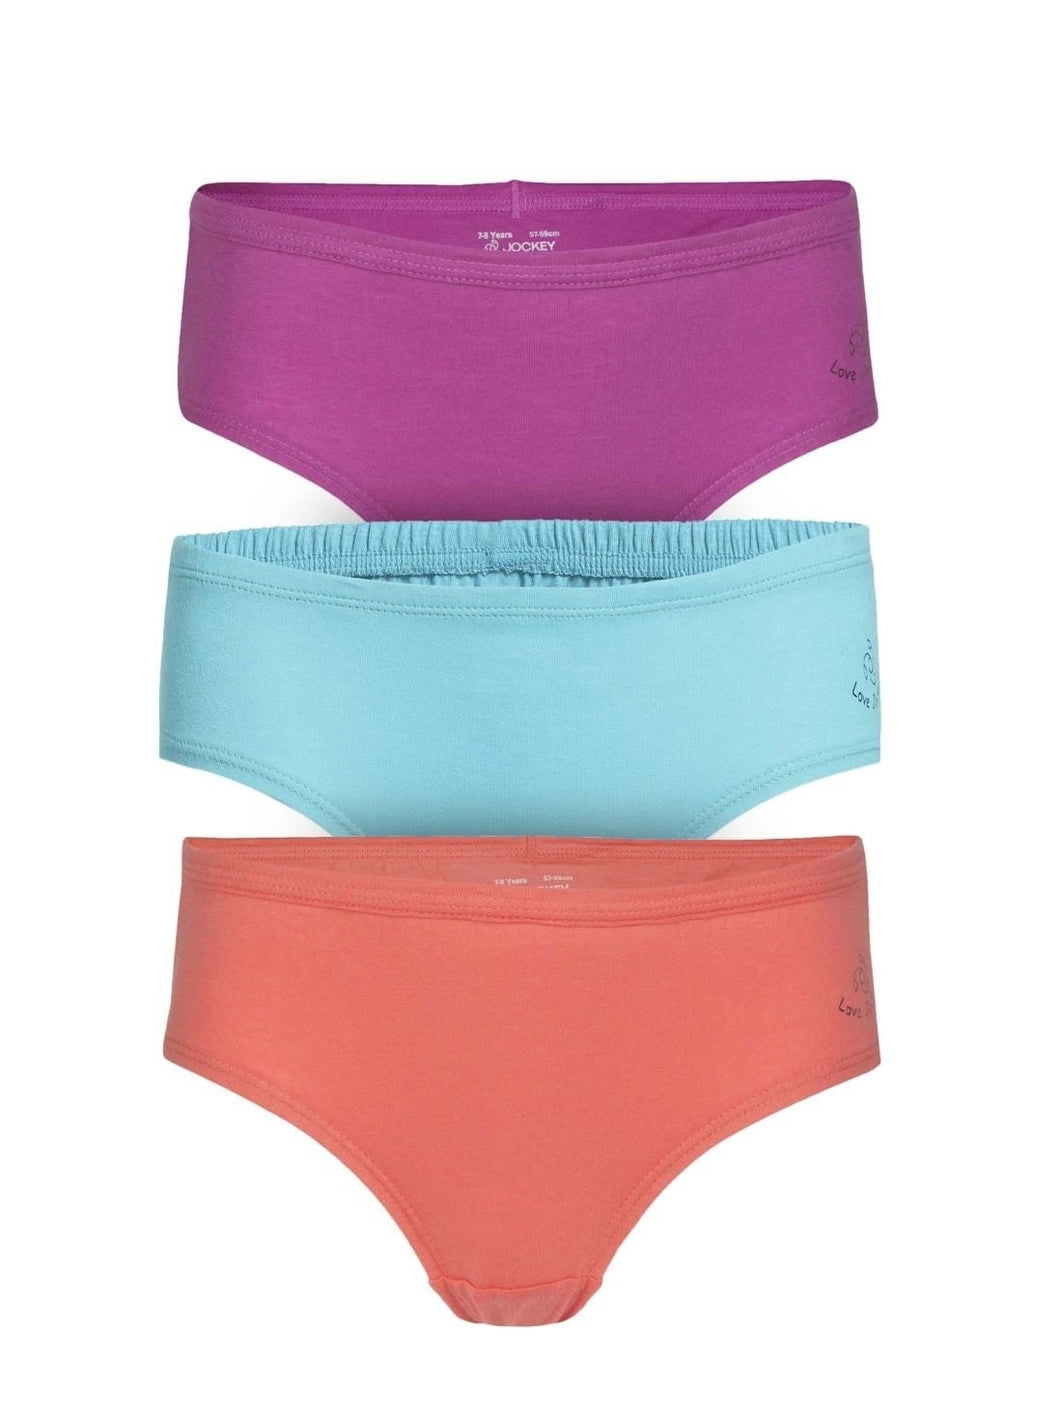 Jockey Solid Assorted Girls Panty Pack Of 3